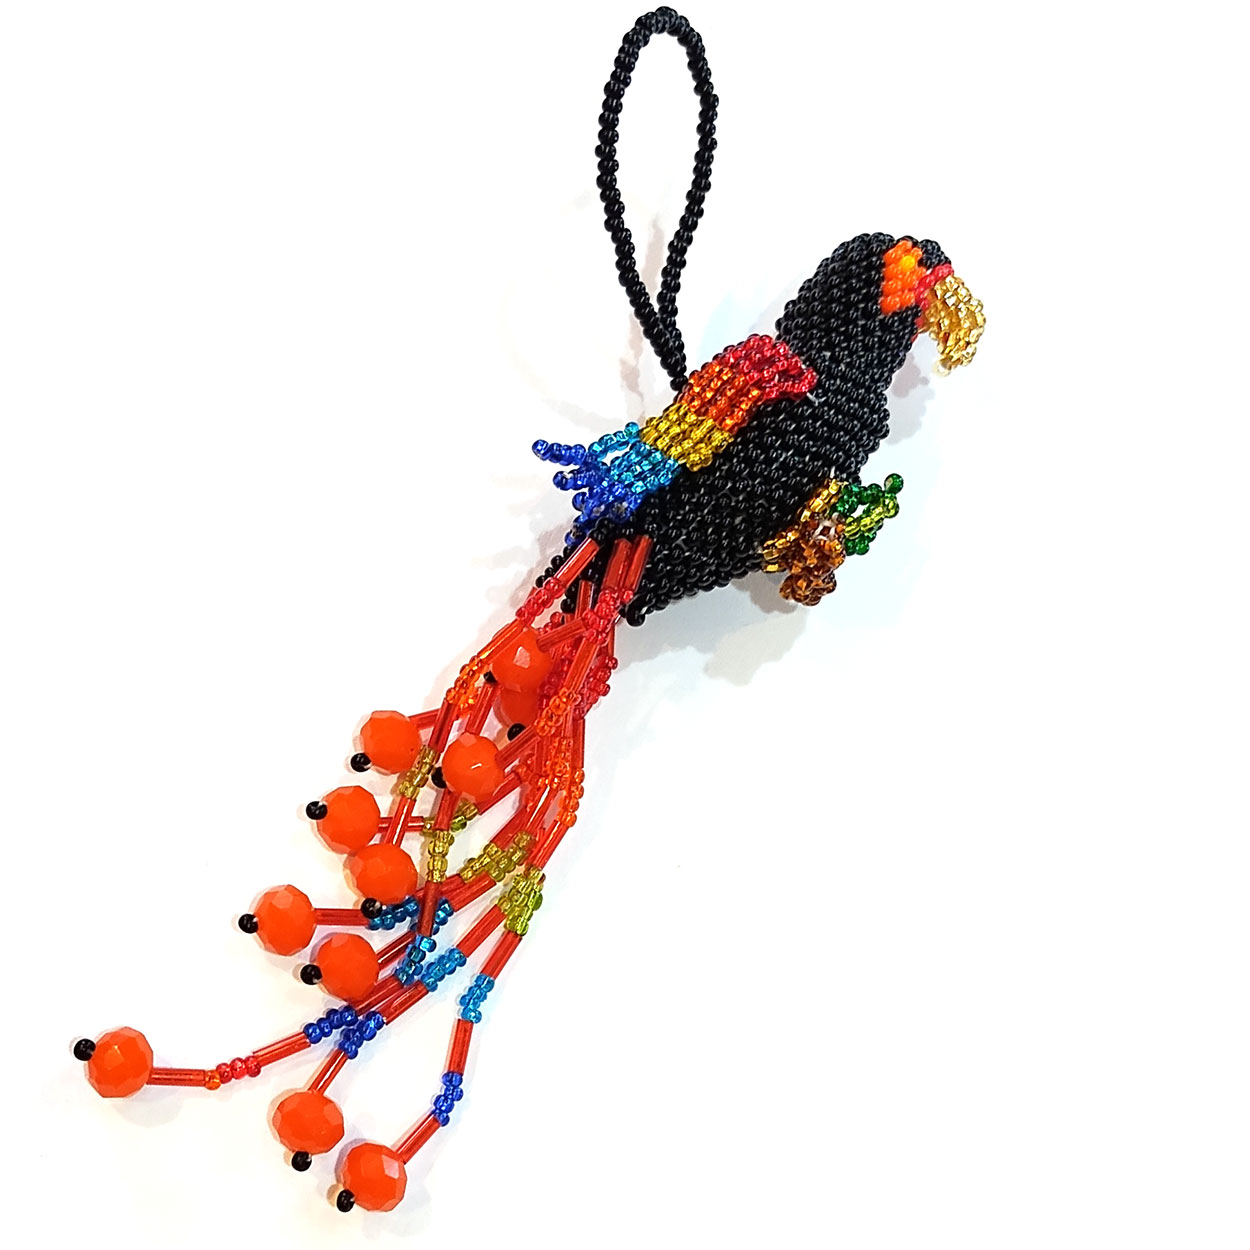 130262 - Hand Made Glass Micro-Bead Hanging Ornament - Black Parrot